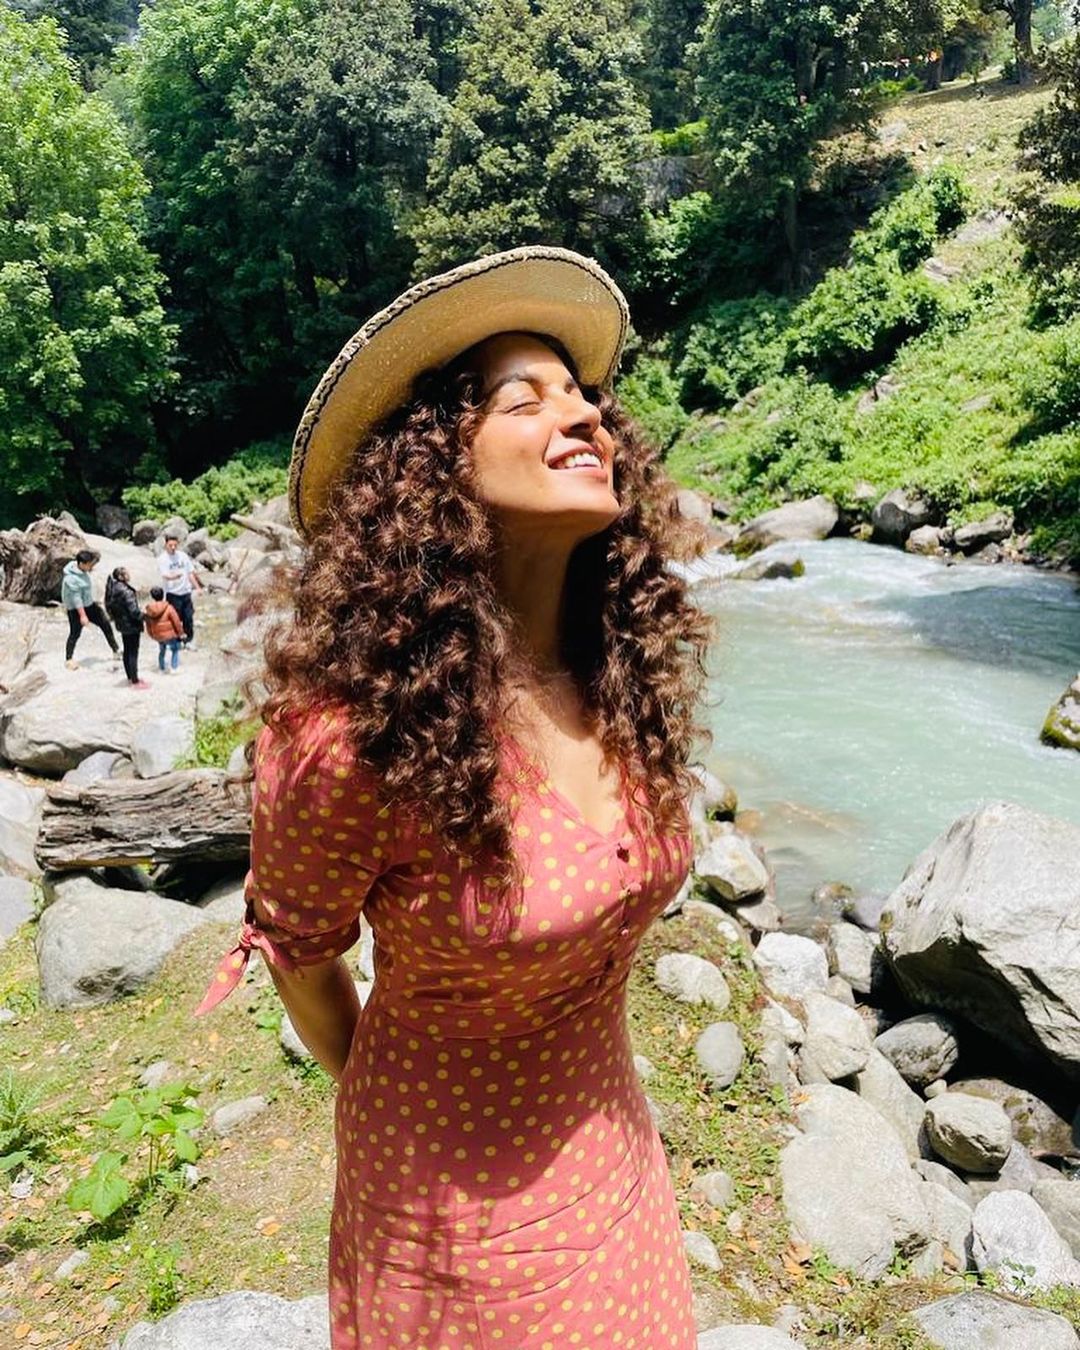 Kangana Ranaut is enjoying a summer break like no other. She is spending it with her family in Manali in the lap of nature.